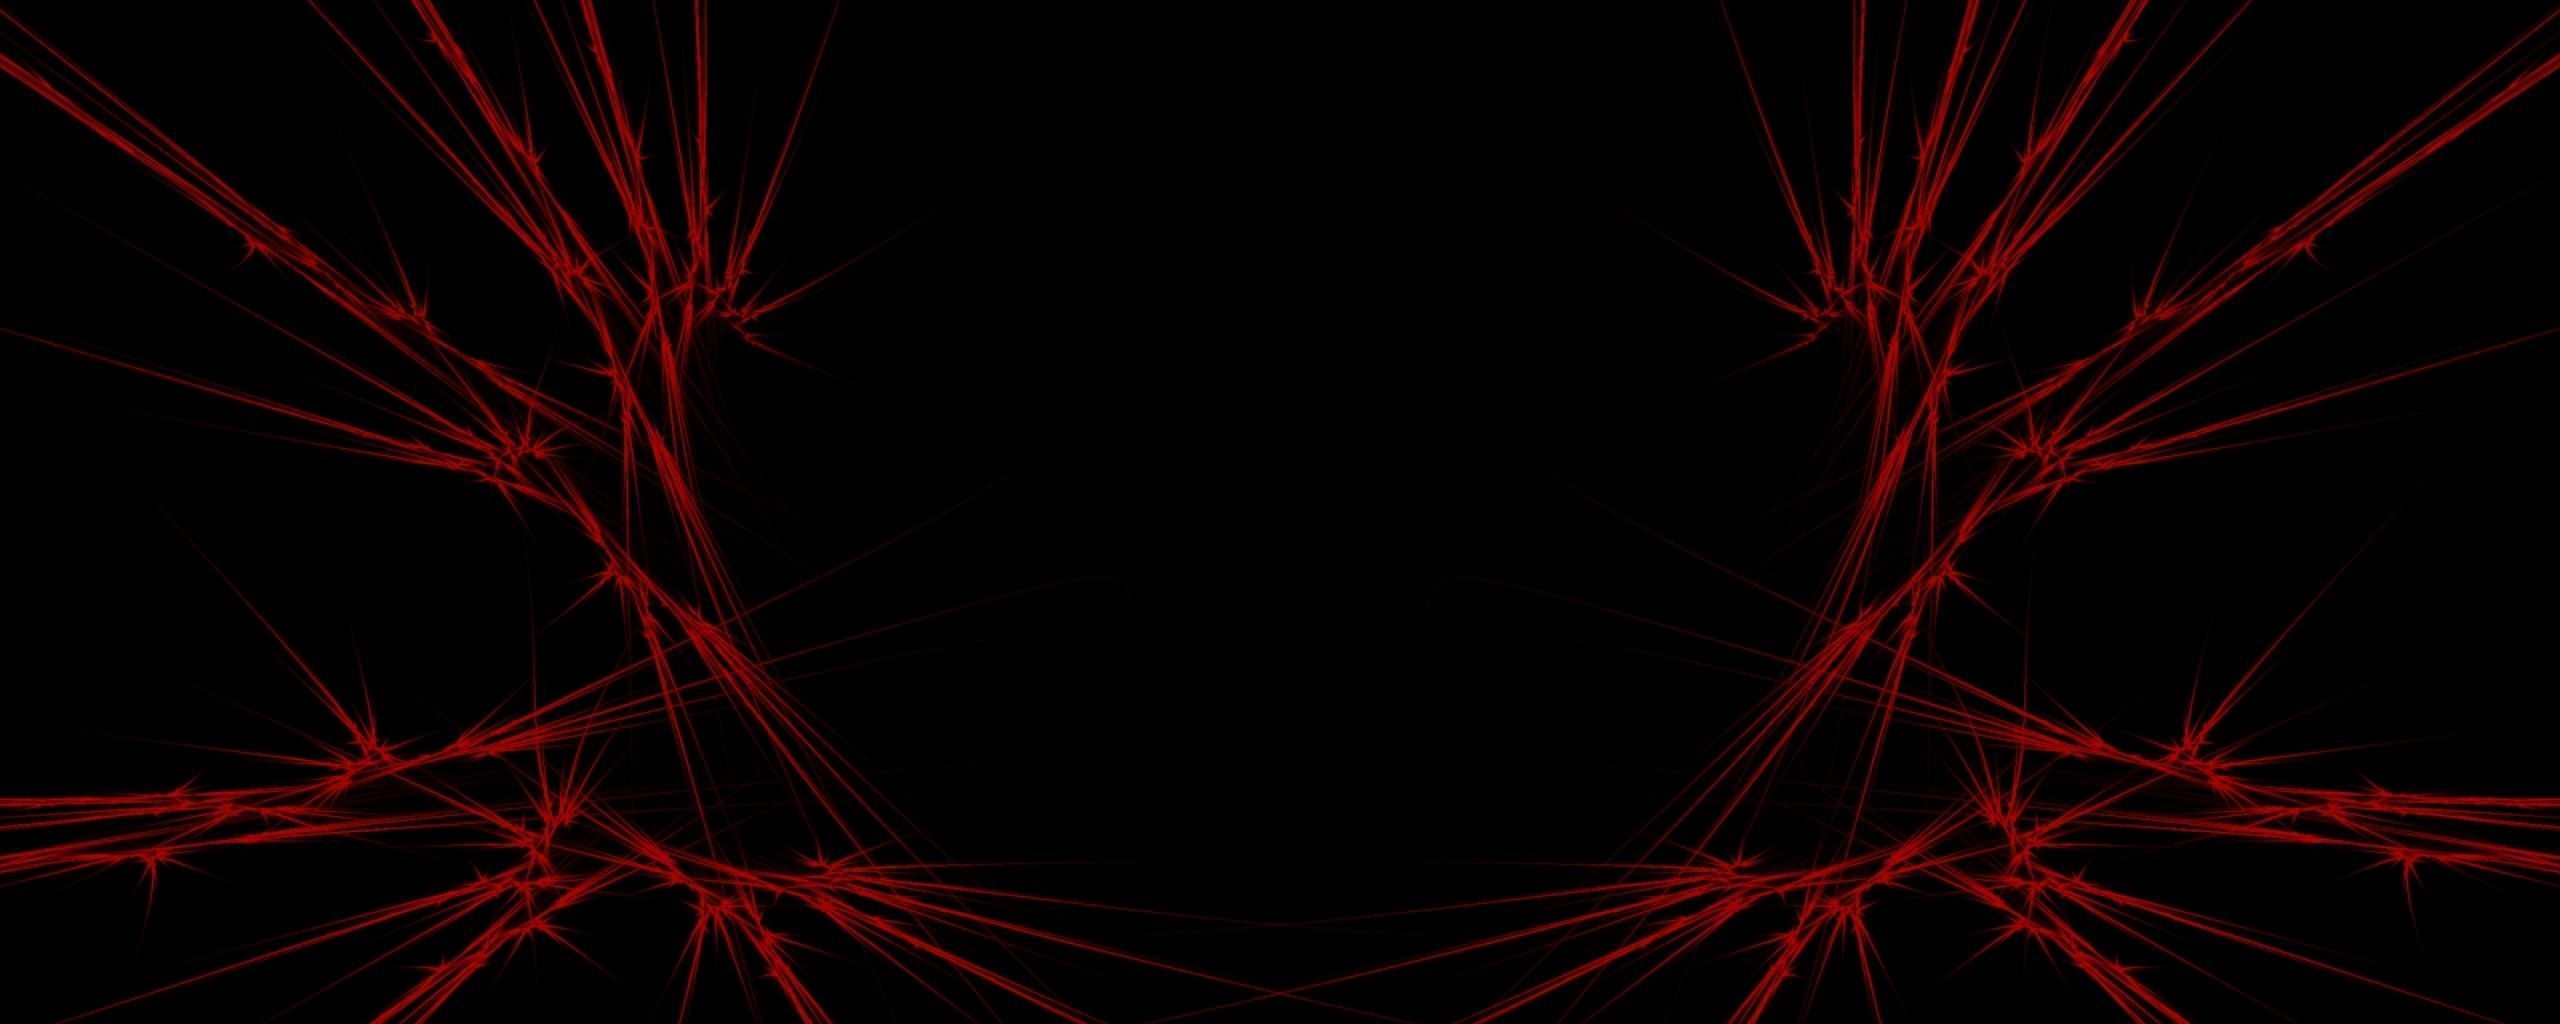 Download Wallpaper 2560x1024 Red, Black, Abstract Dual Monitor